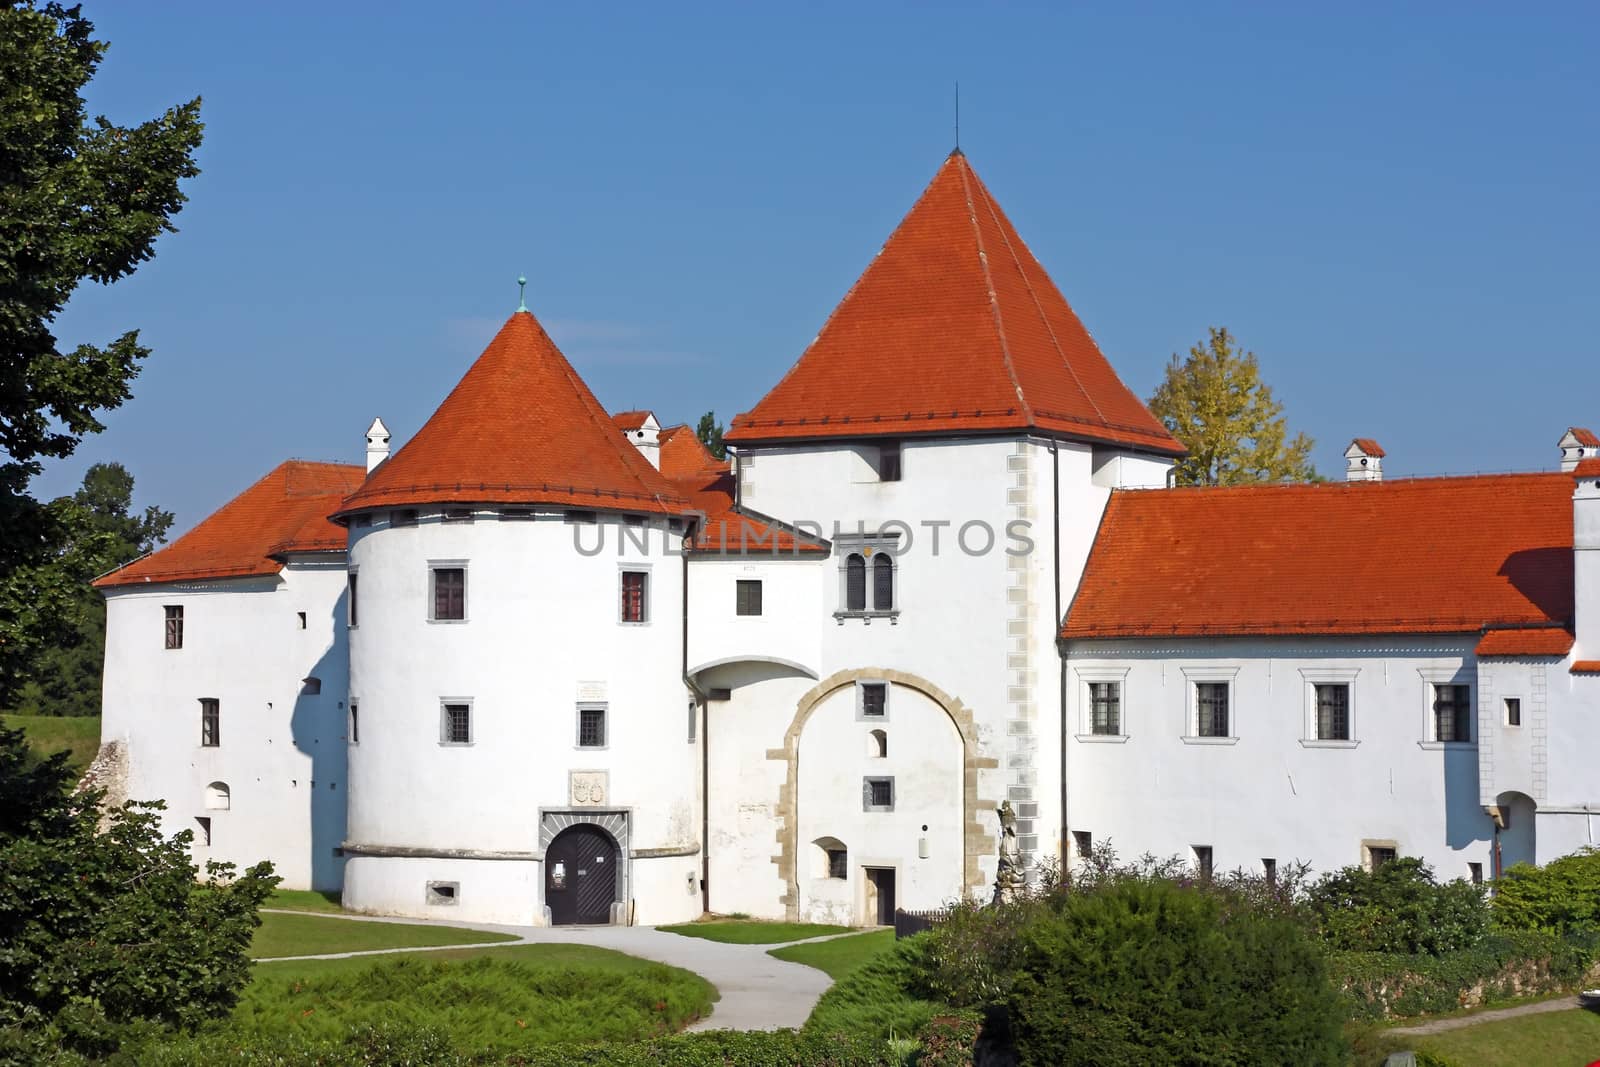 Varazdin castle in the Old Town, originally built in the 13th century